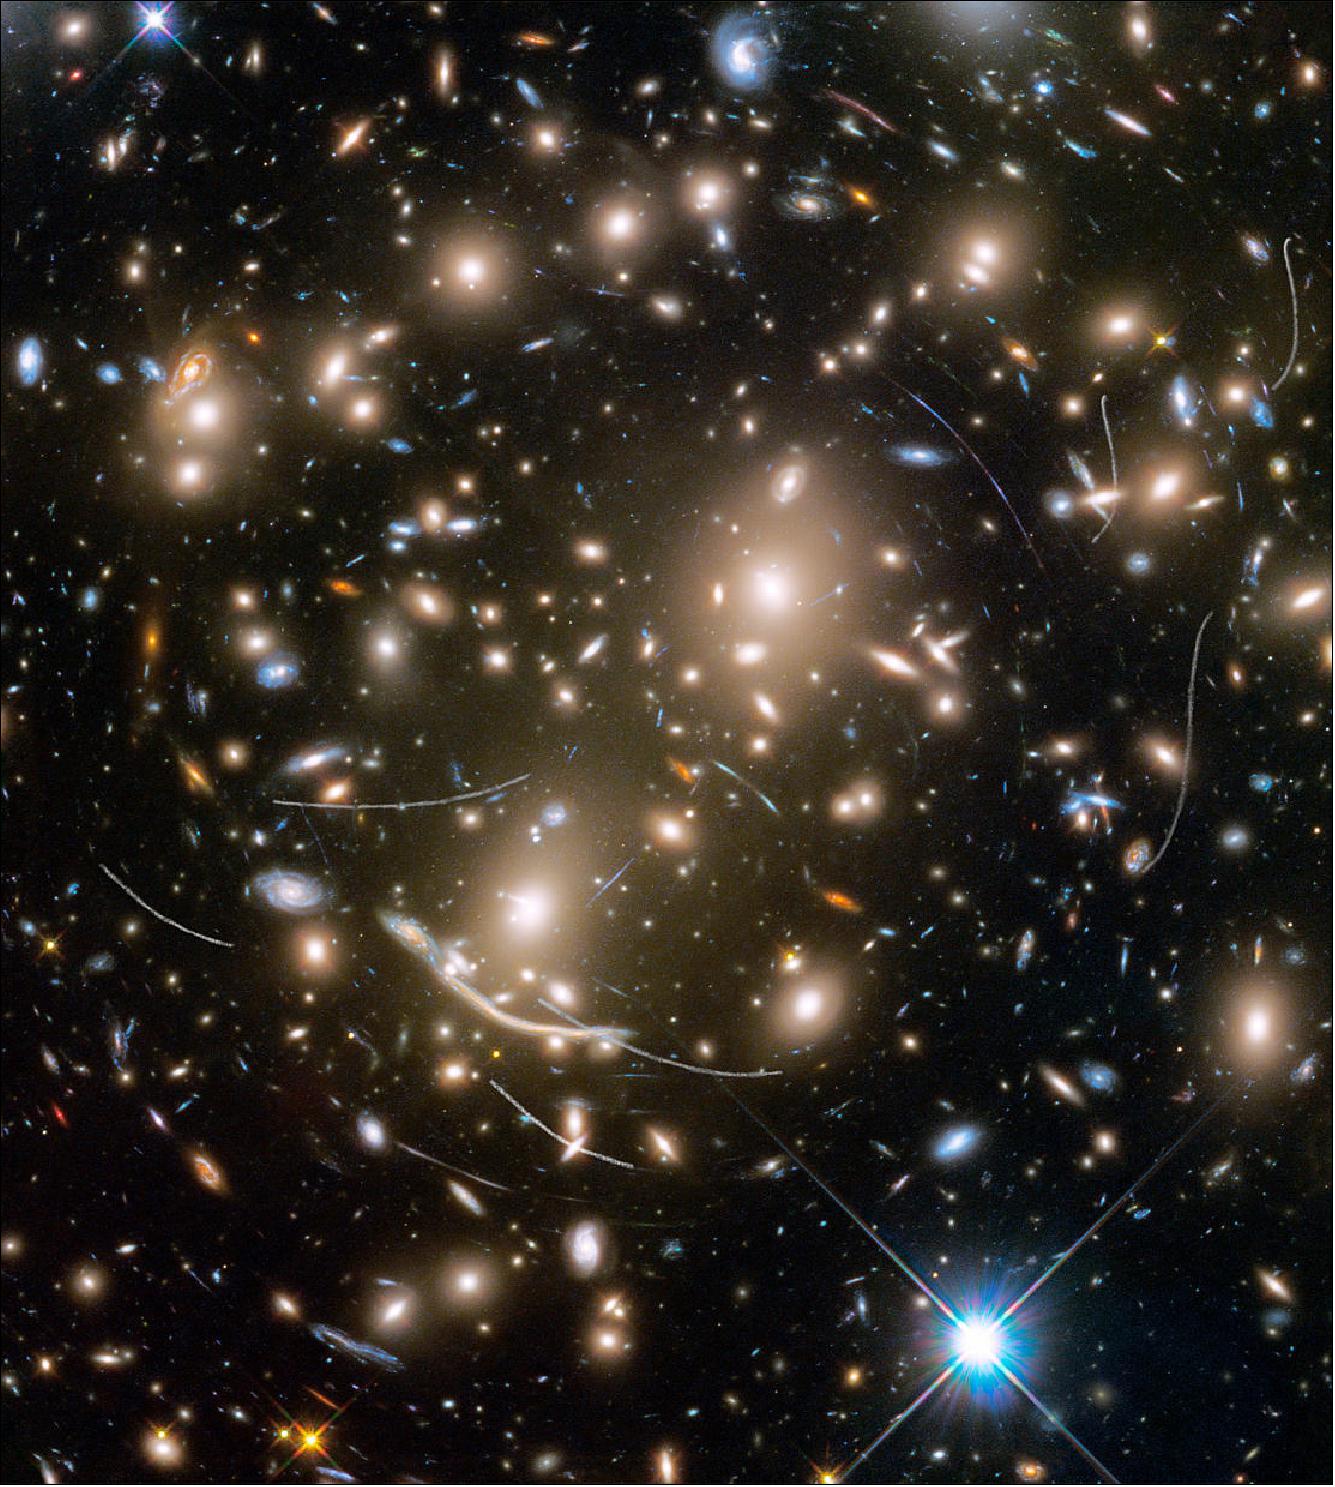 Figure 32: This image was assembled from several exposures taken in visible and infrared light. The field's position on the sky is near the ecliptic, the plane of our Solar System. This is the zone in which most asteroids reside, which is why Hubble astronomers saw so many crossings. Hubble deep-sky observations taken along a line-of-sight near the plane of our Solar System commonly record asteroid trails (image credit: NASA, ESA, and B. Sunnquist and J. Mack (STScI) Acknowledgment: NASA, ESA, and J. Lotz (STScI) and the HFF Team)